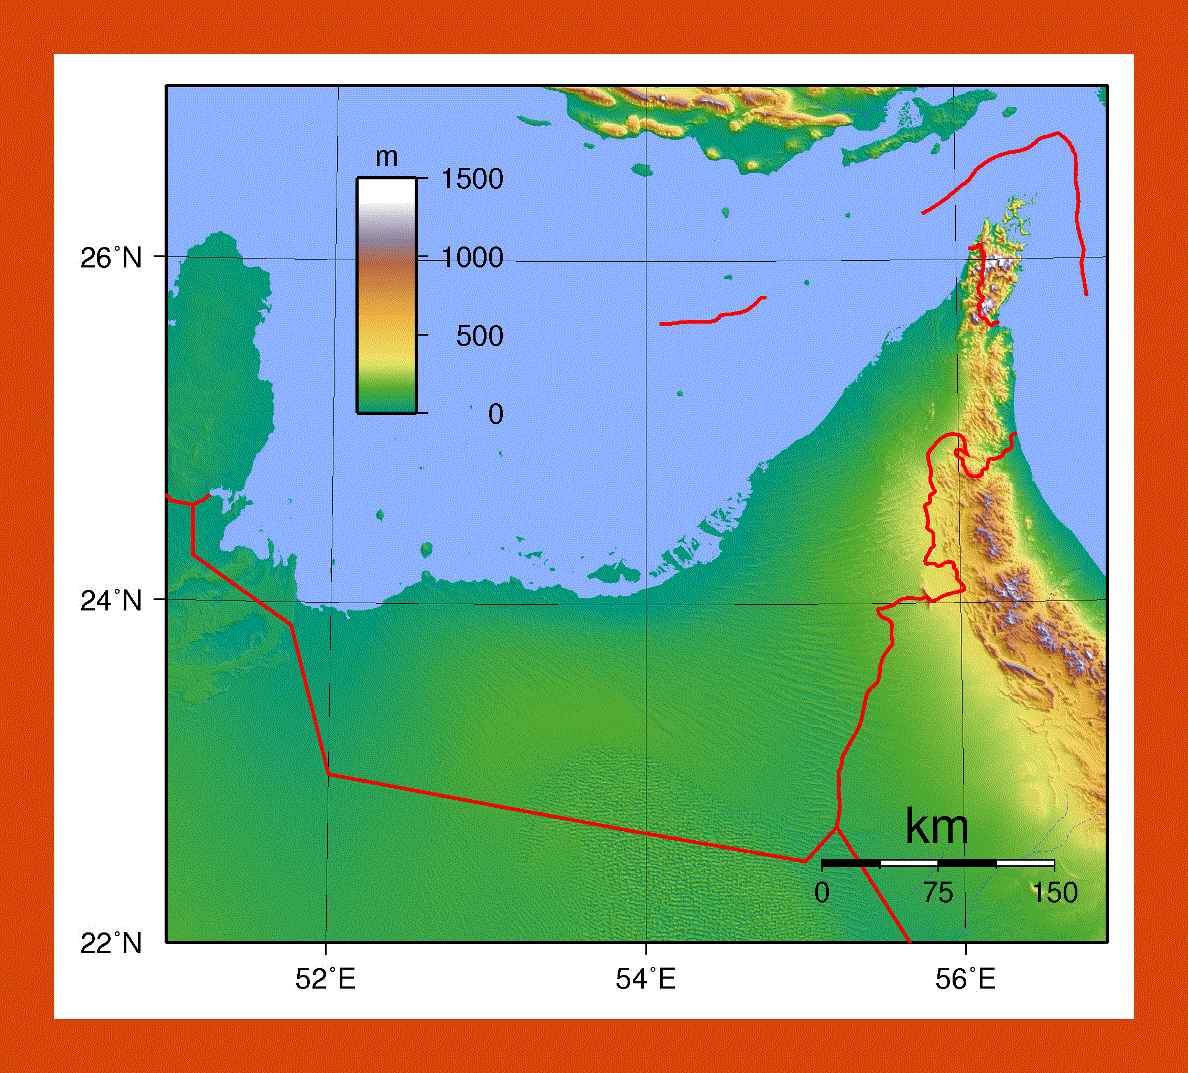 Topographical map of UAE